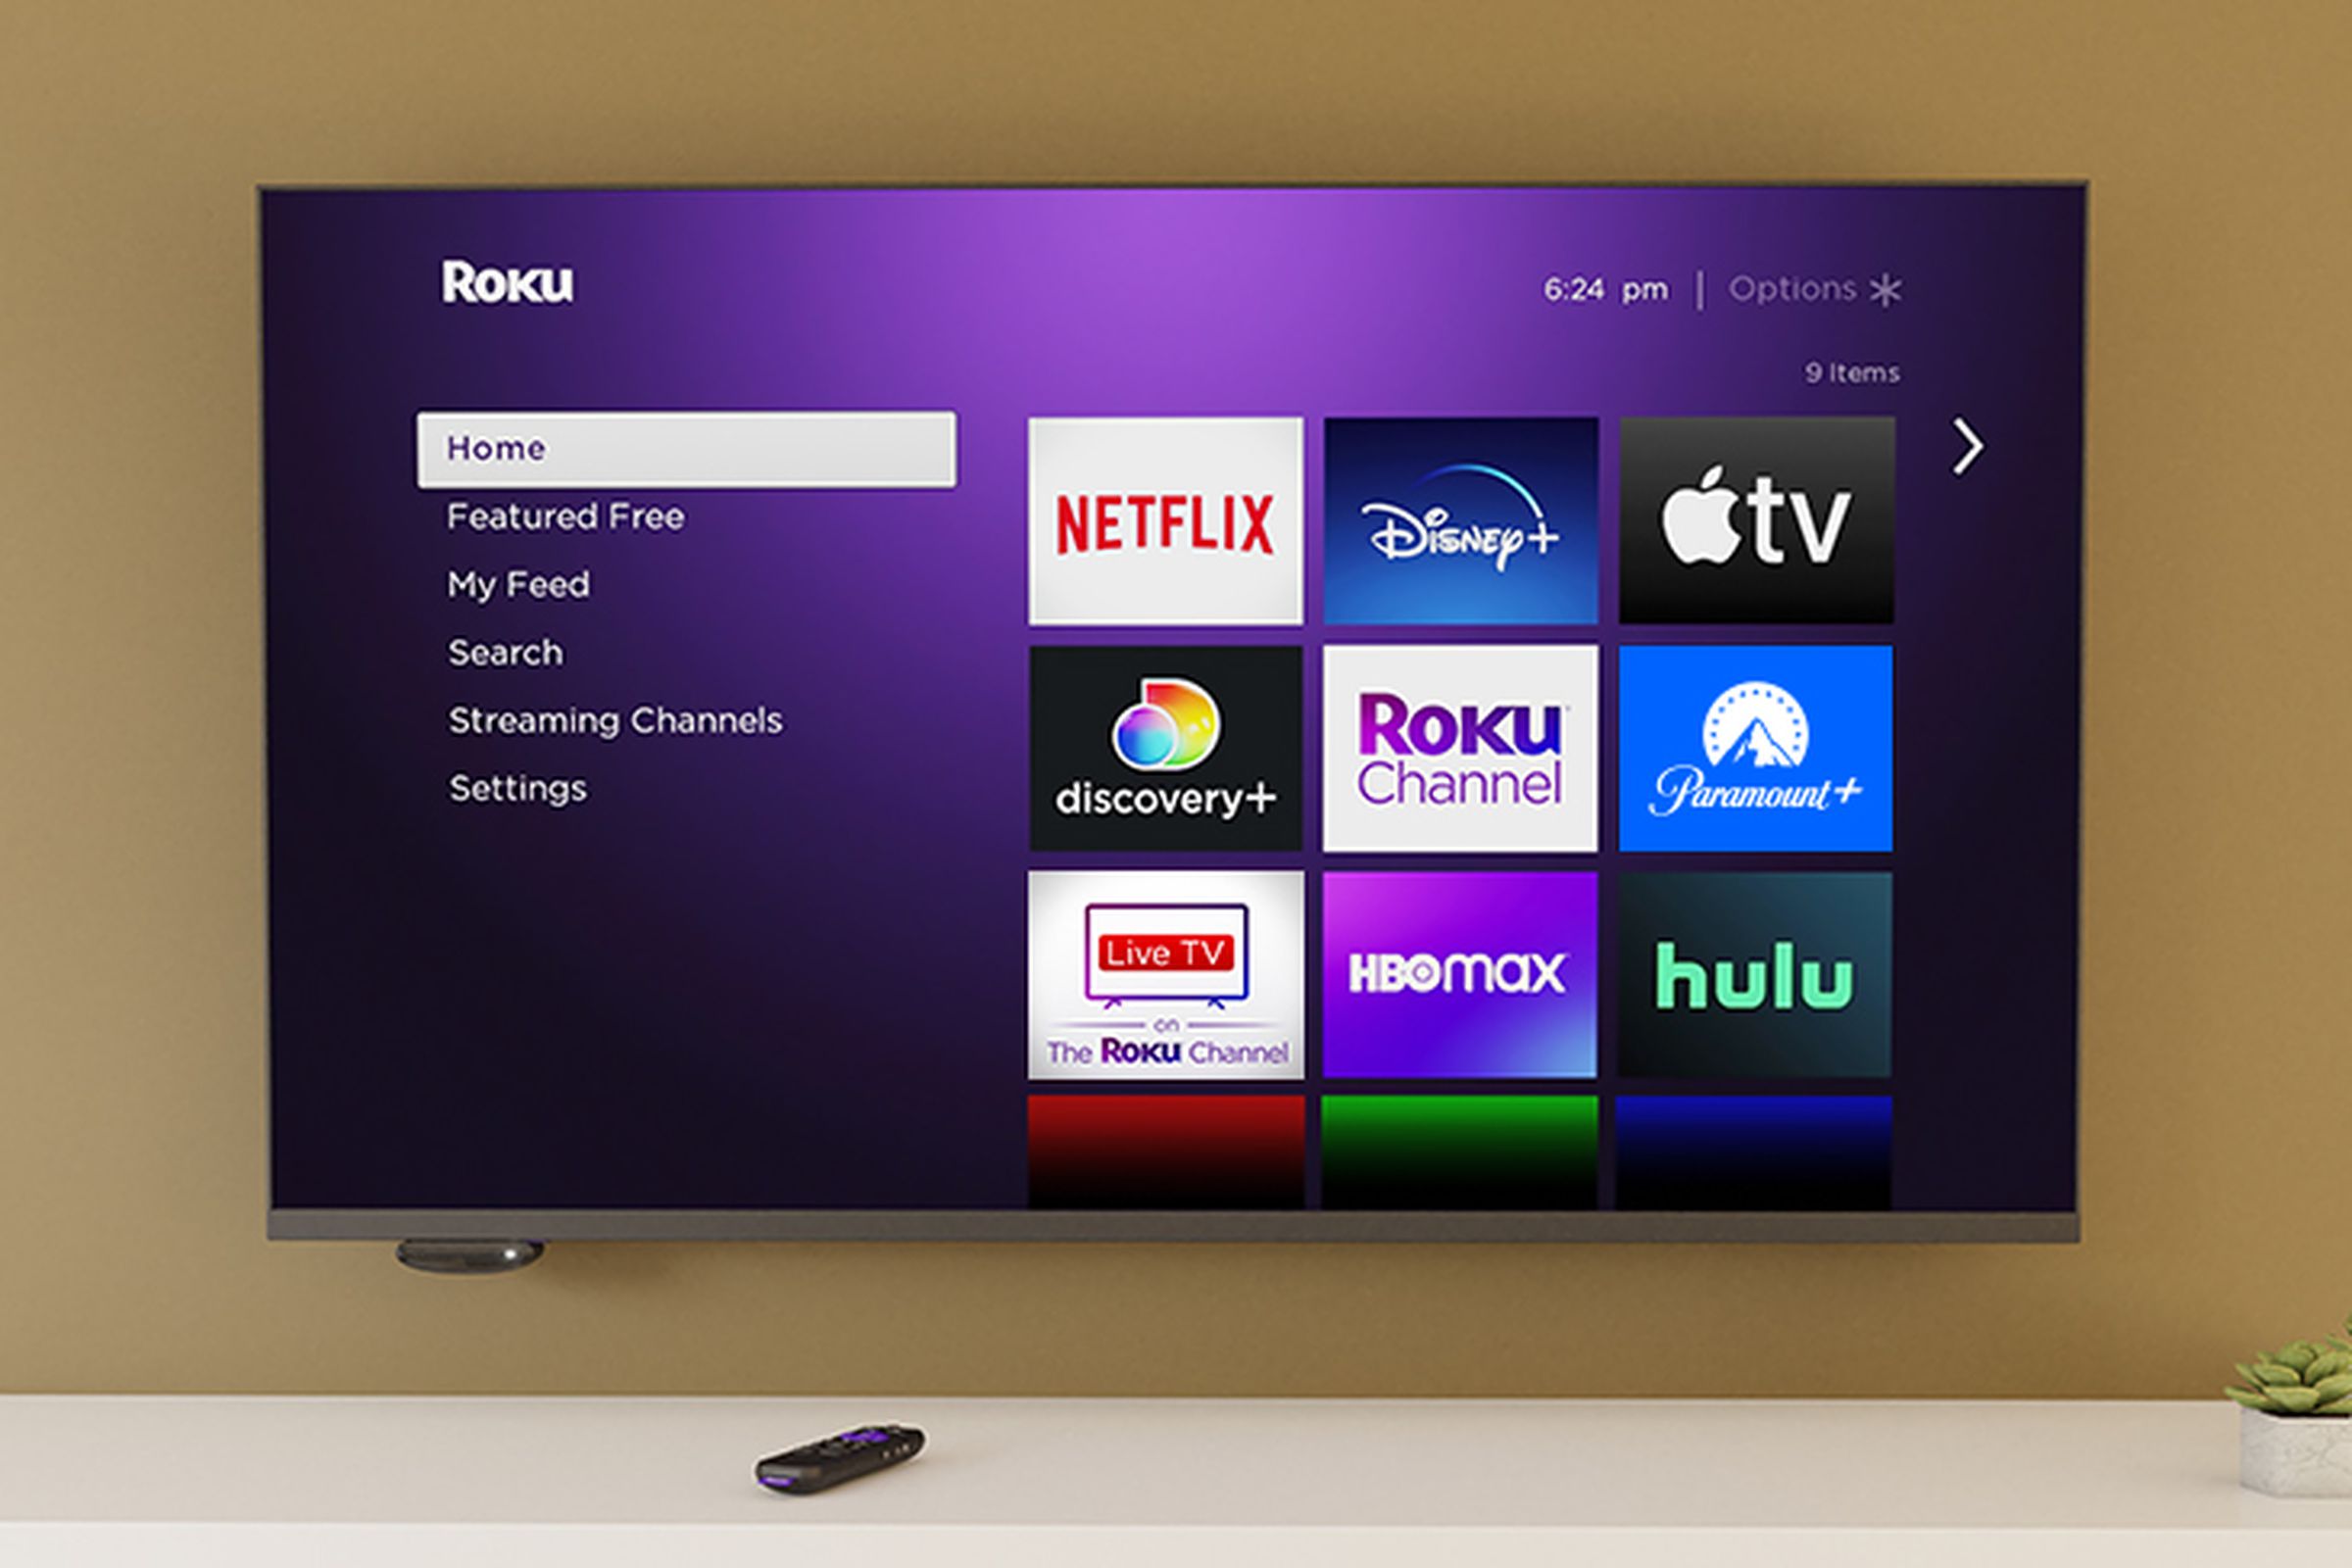 Roku’s live TV app displayed on the home screen in Roku OS 10.5.